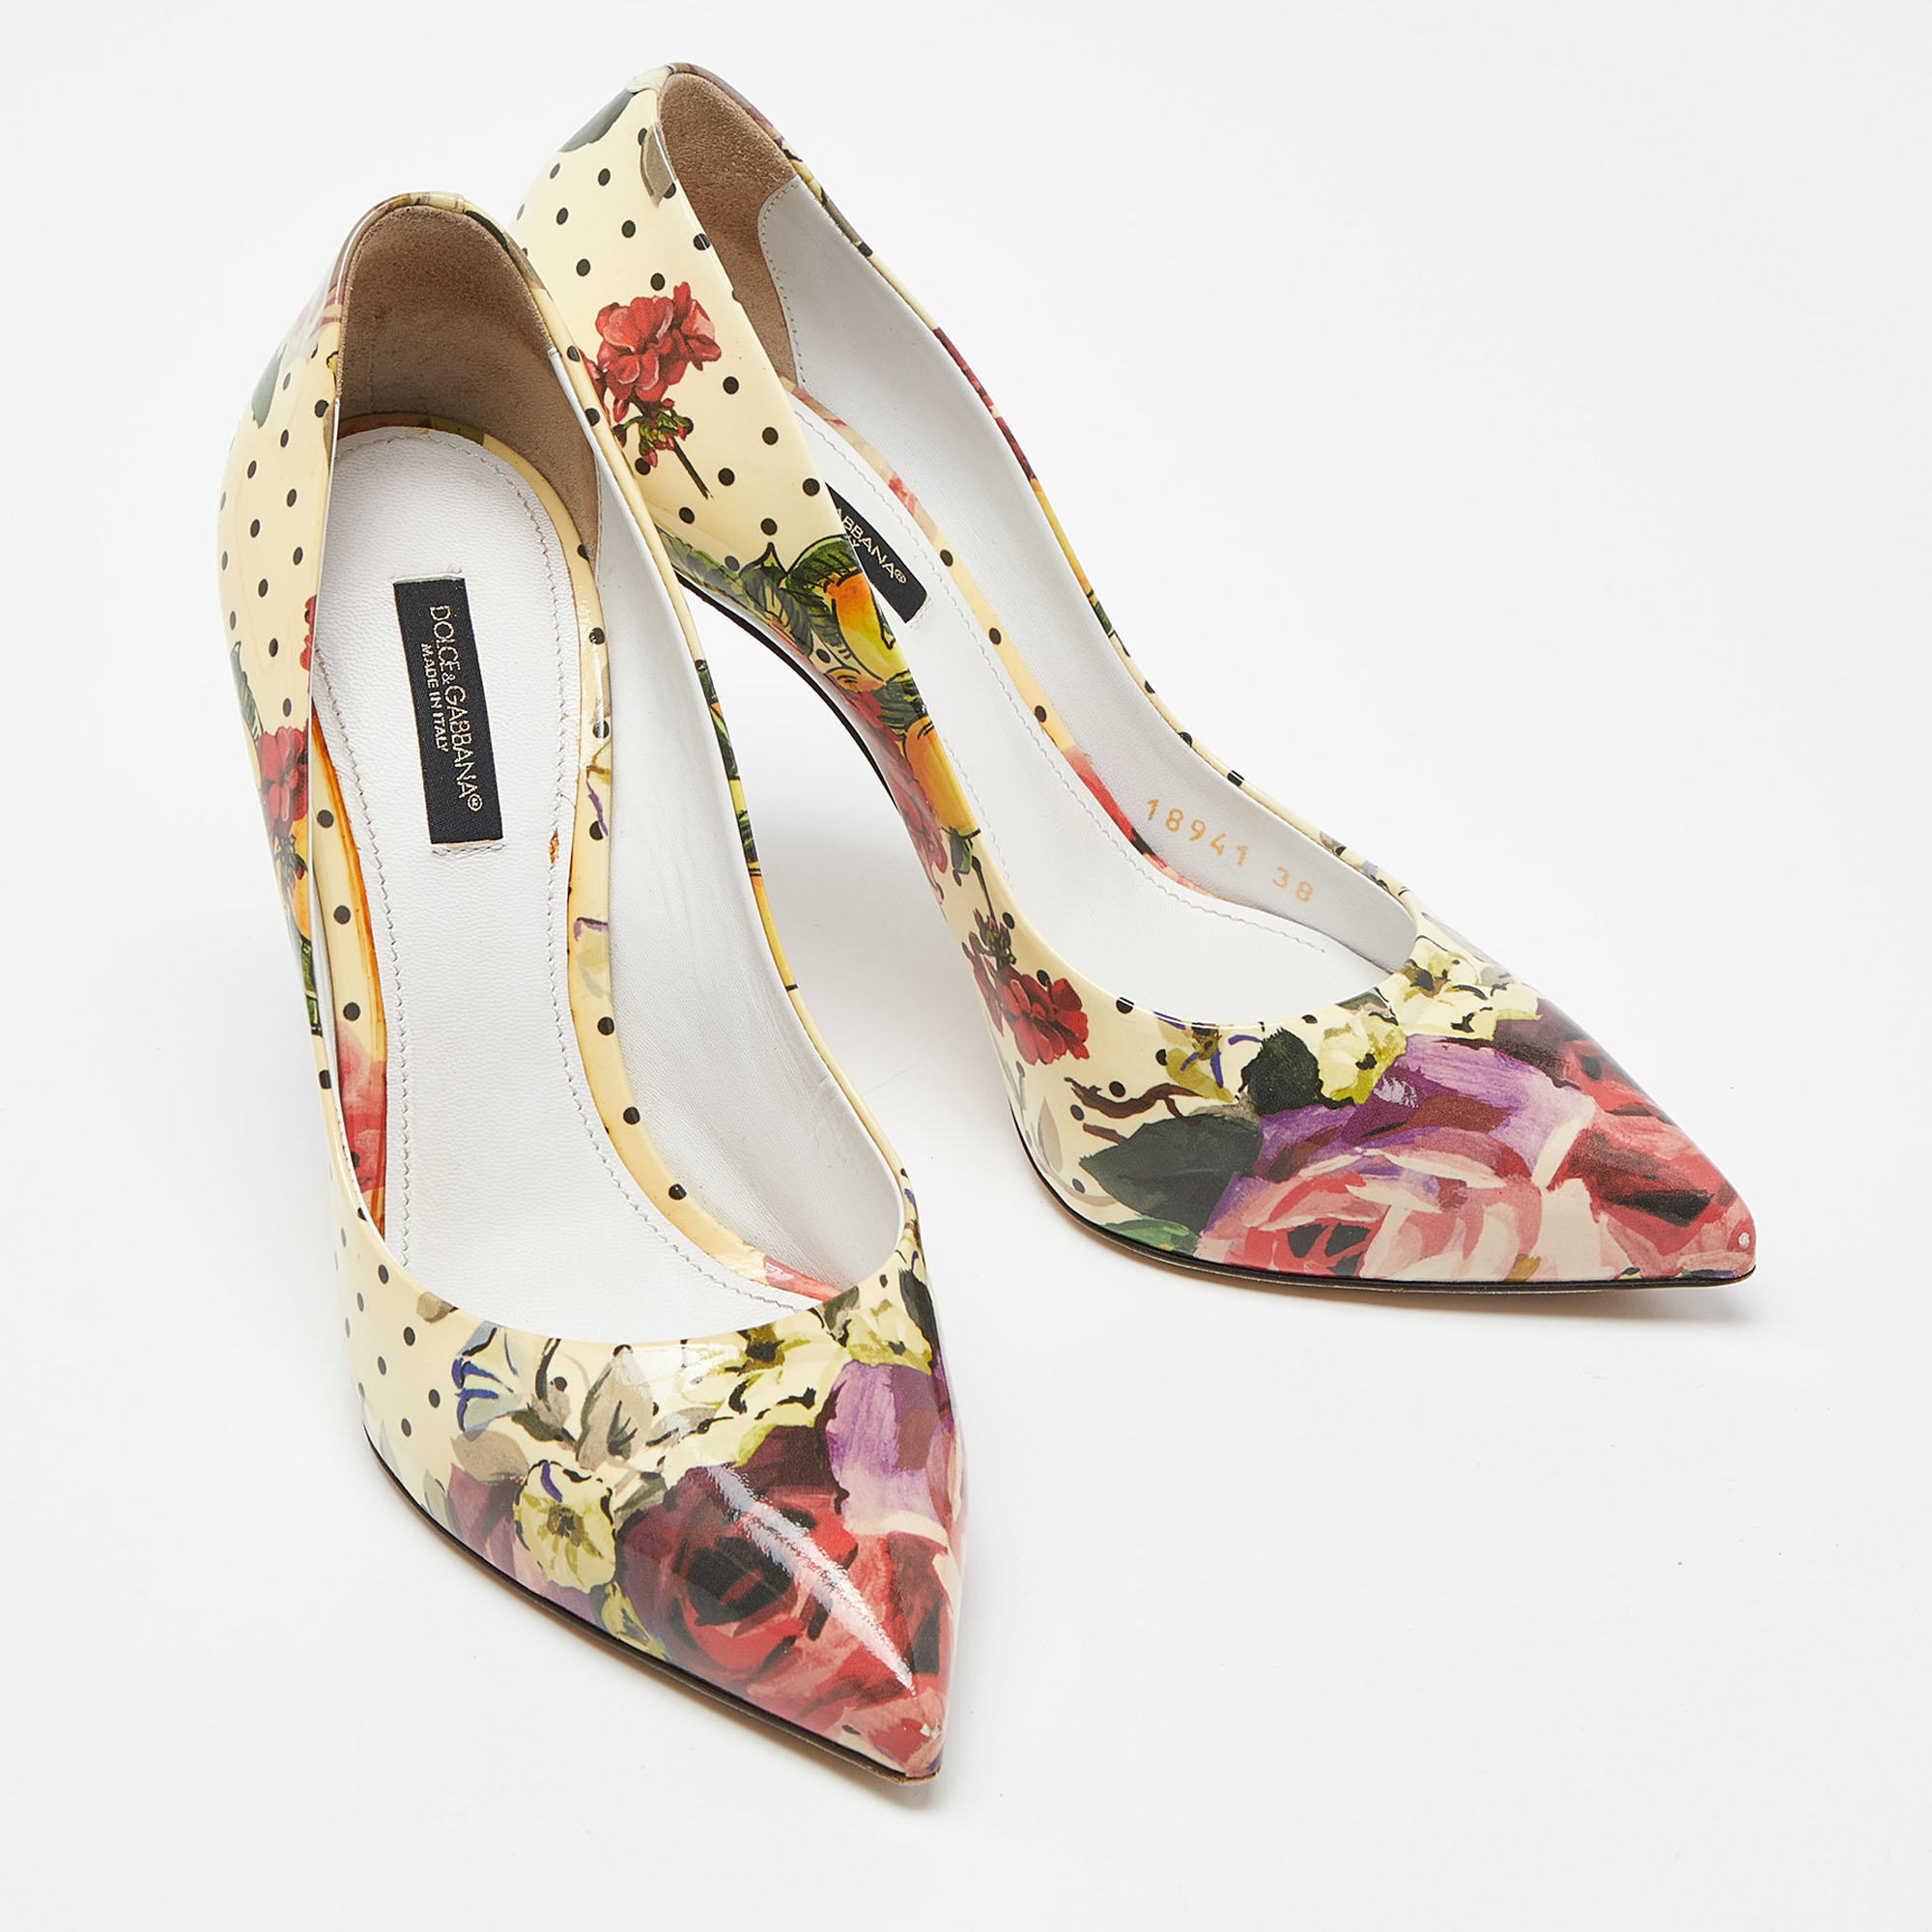 Dolce & Gabbana Multicolor Floral Print Patent Leather Pointed Toe Pumps Size 38